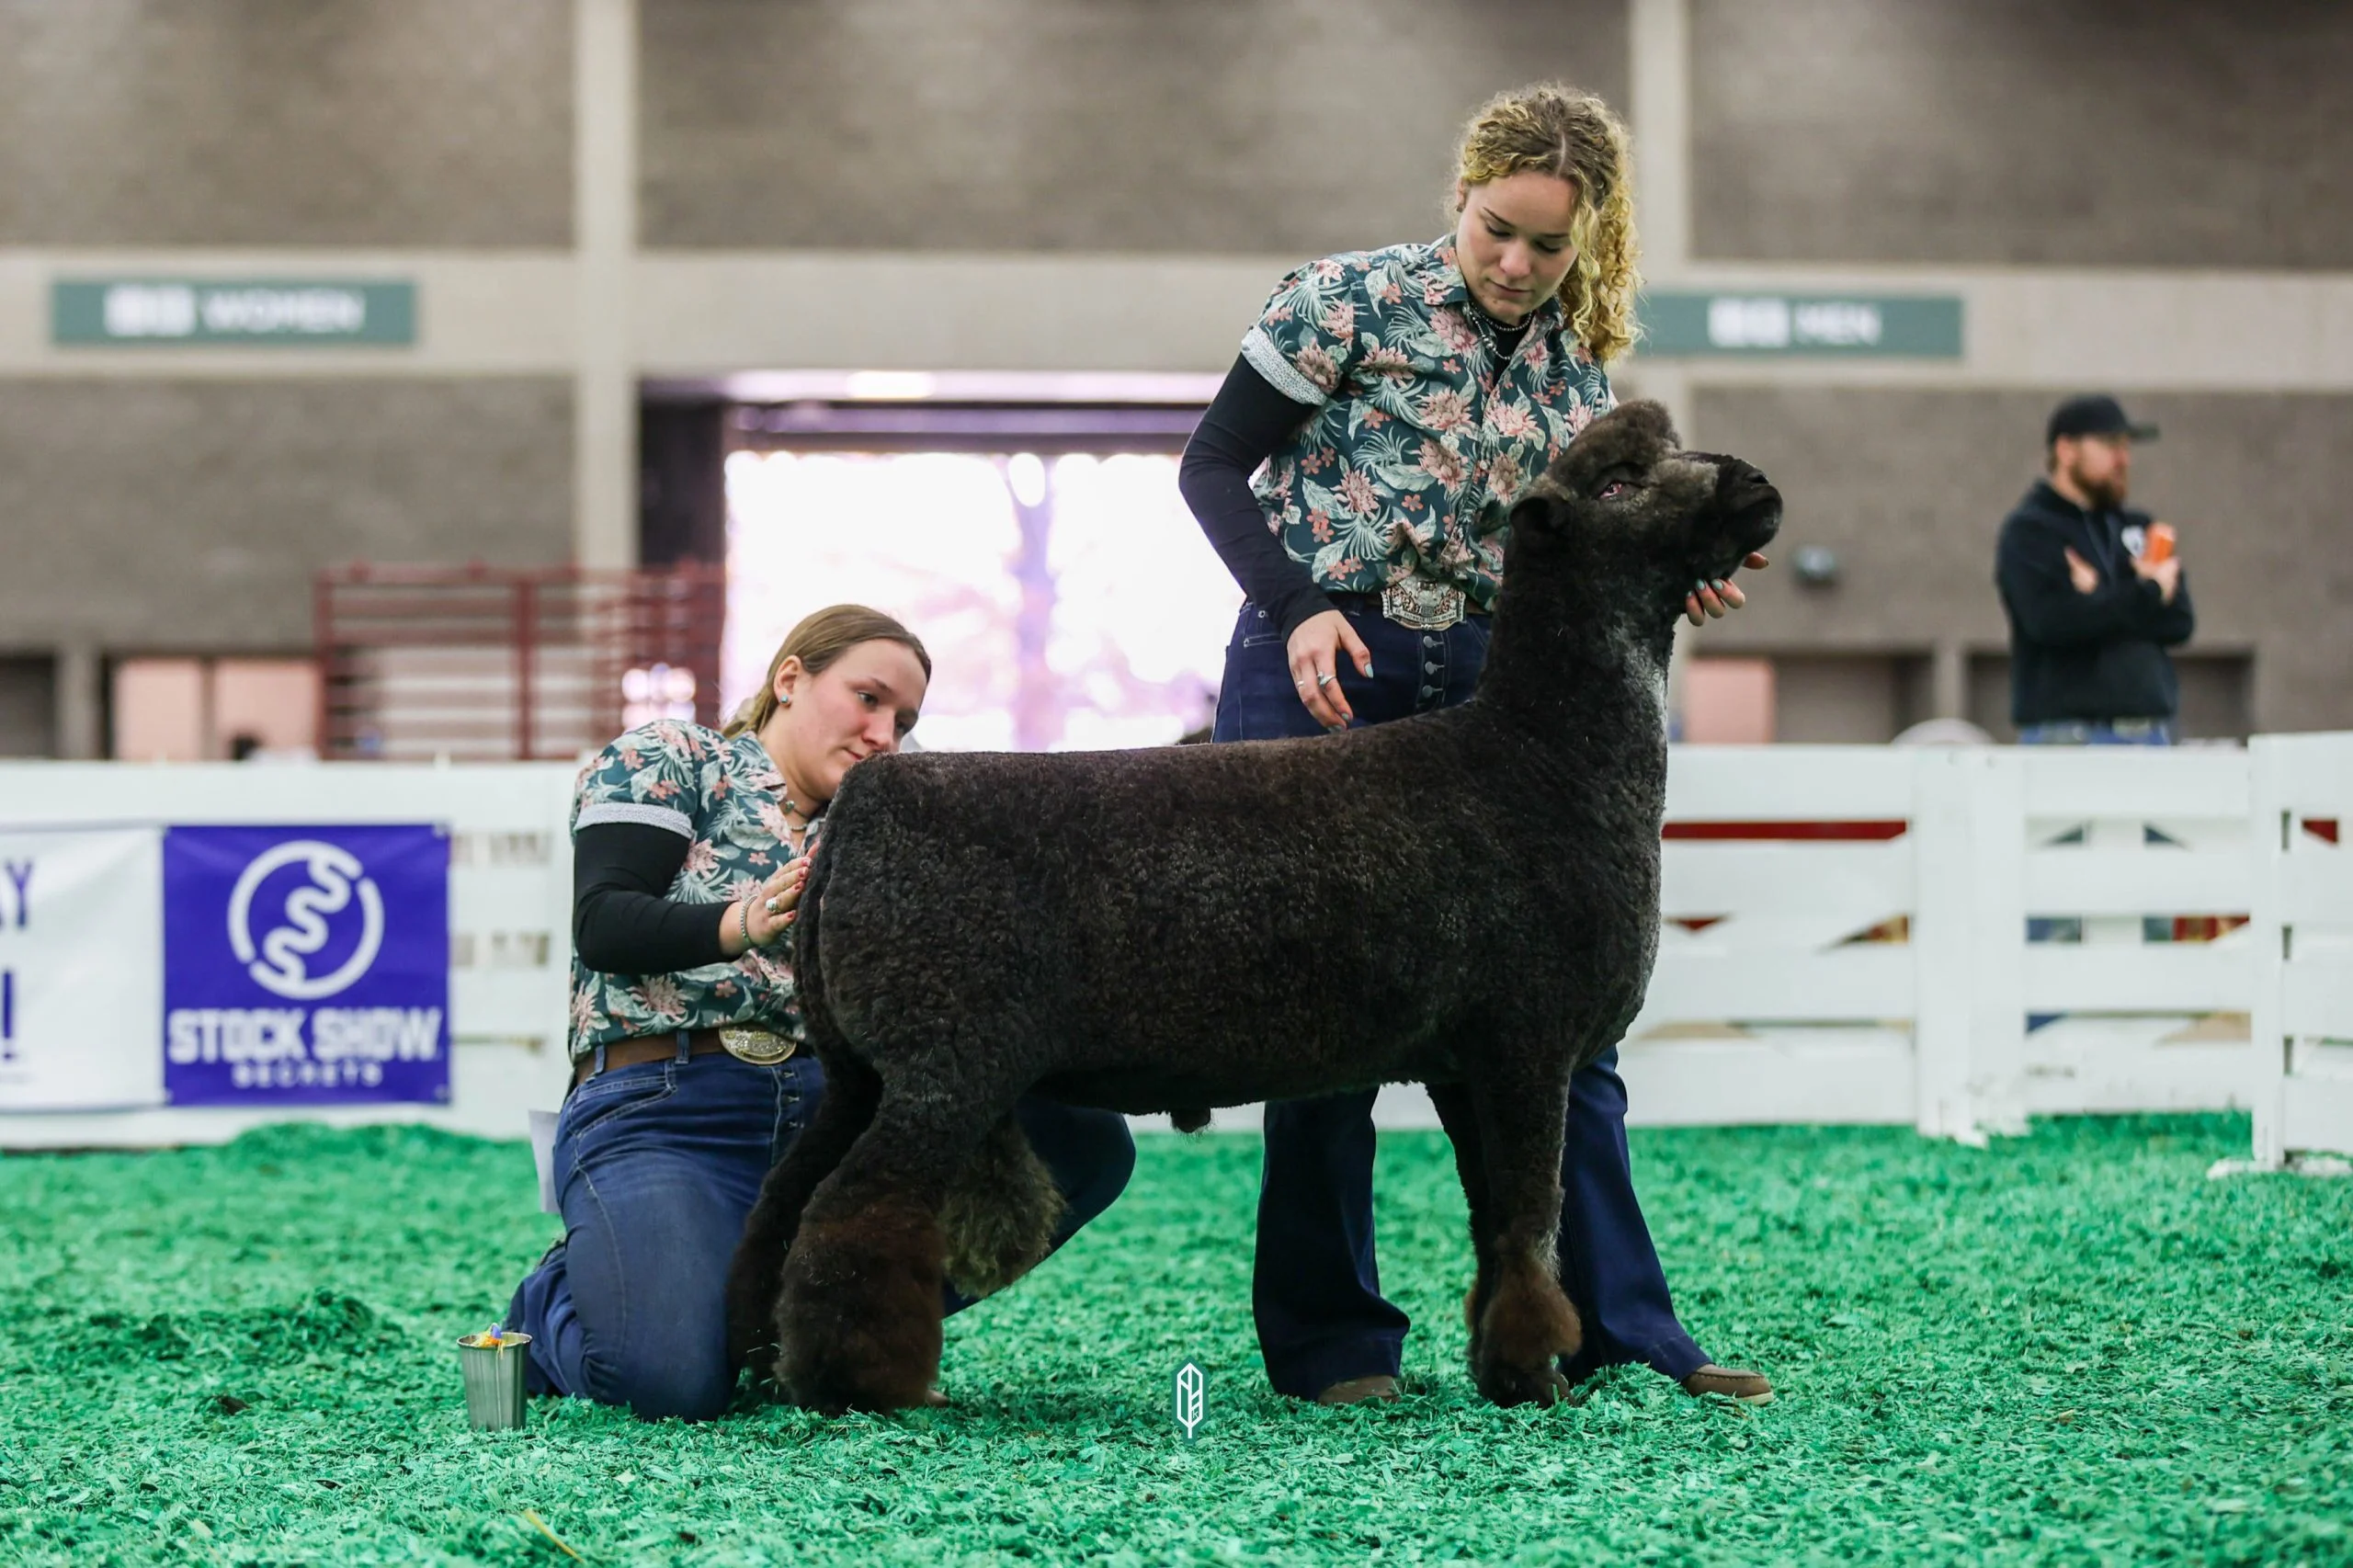 2023 National Natural Colored Romney Show at NAILE
1st place fall ram lamb exhibited by Teresa Hromis of Winding Wicks Farm